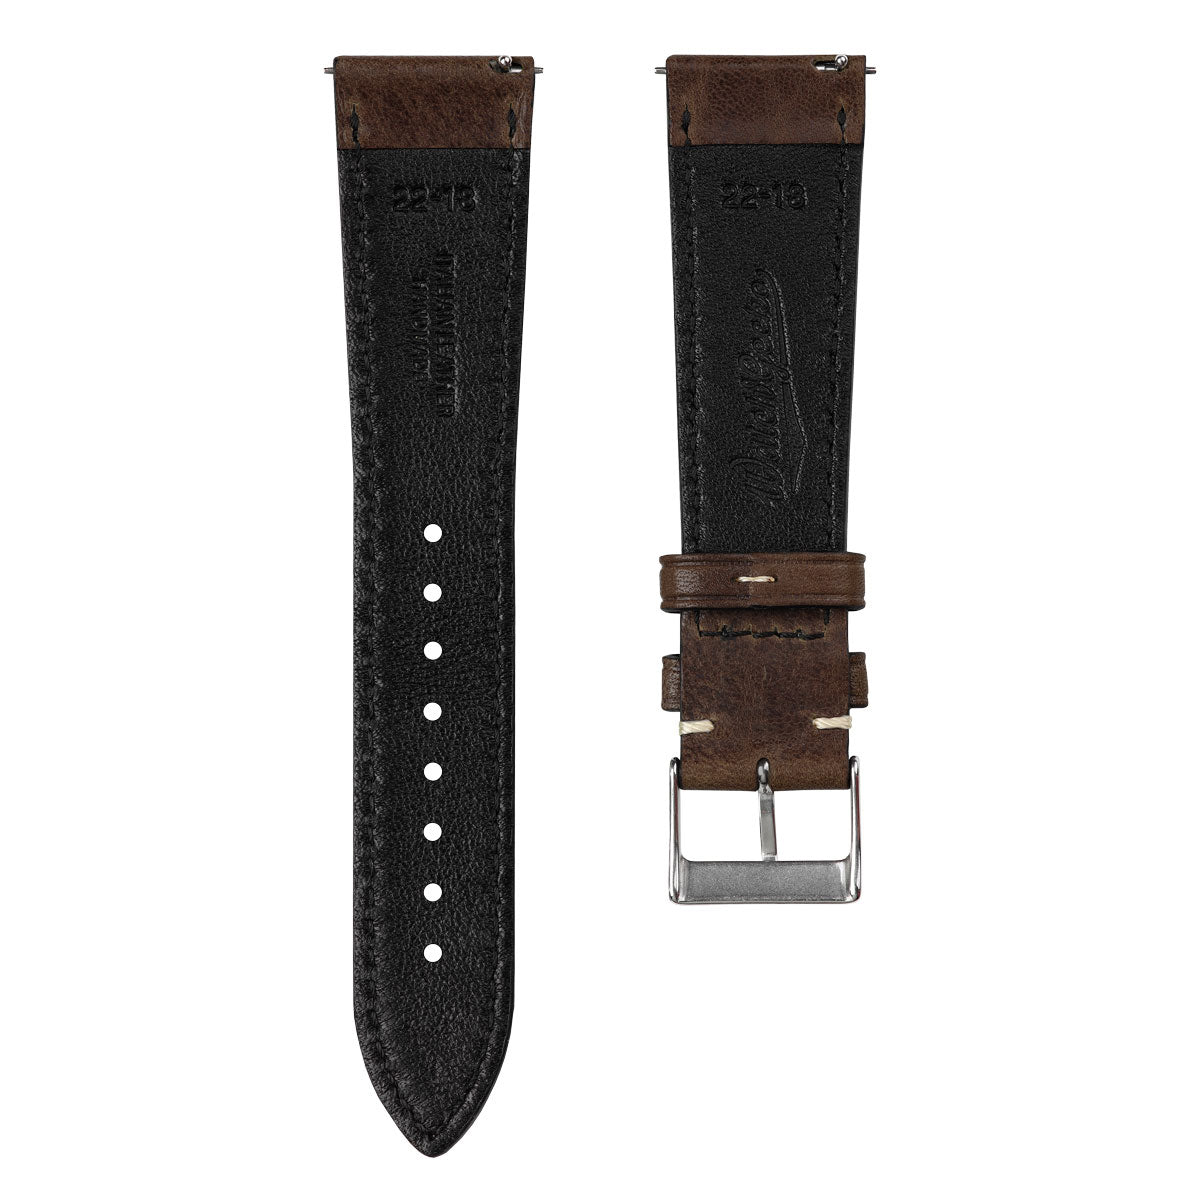 Flat Highley Genuine Leather Watch Strap - Chocolate Brown